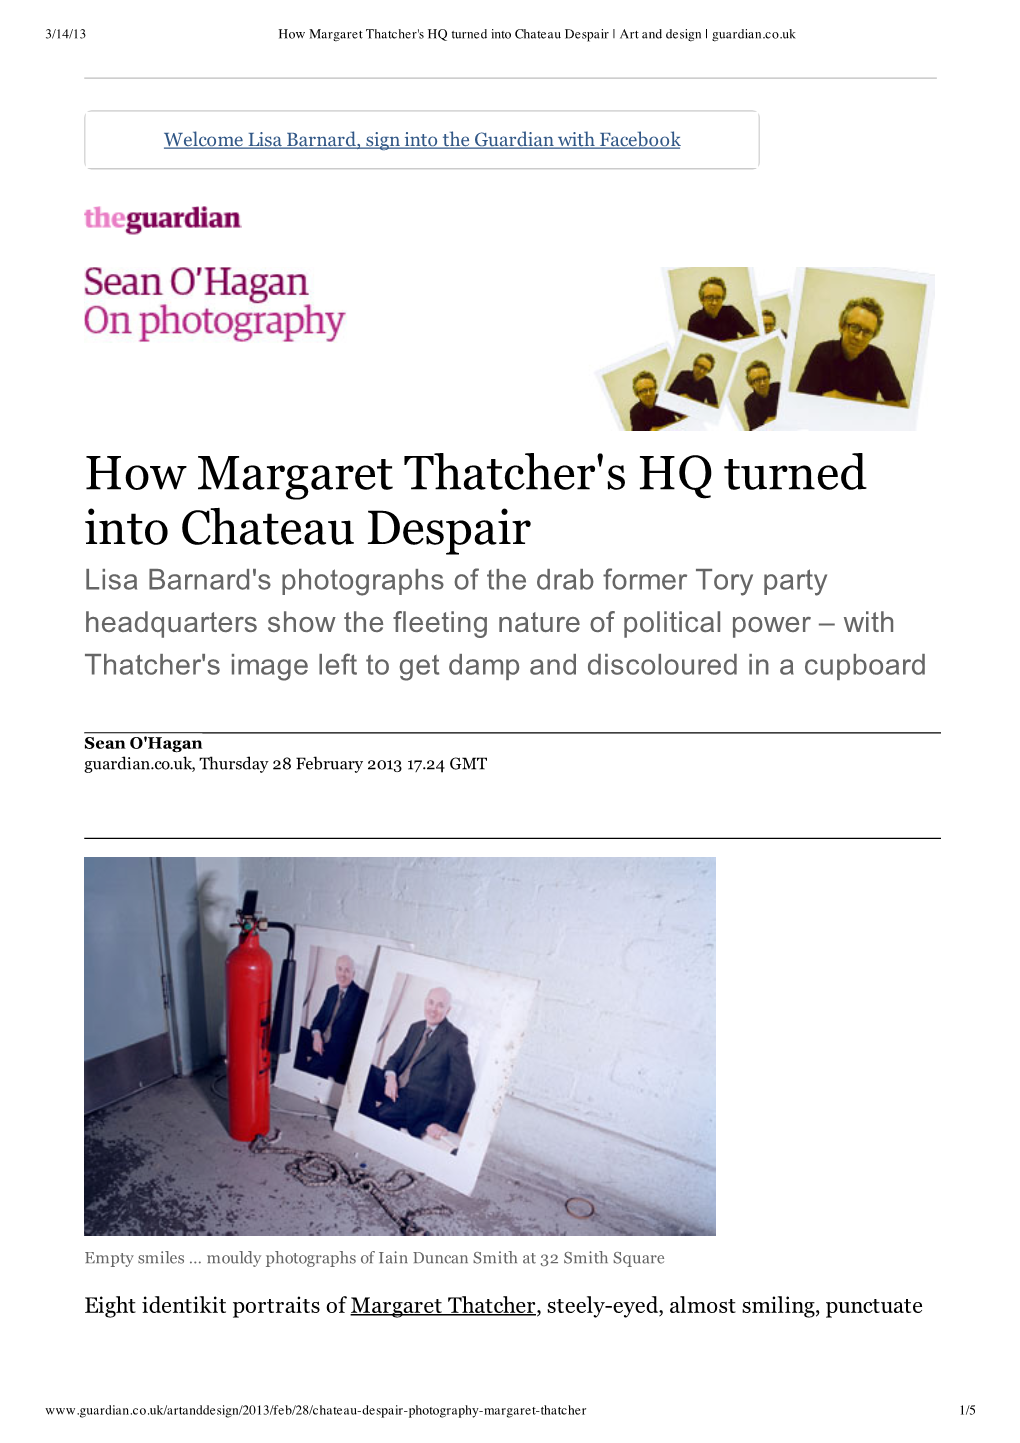 How Margaret Thatcher's HQ Turned Into Chateau Despair by Sean O